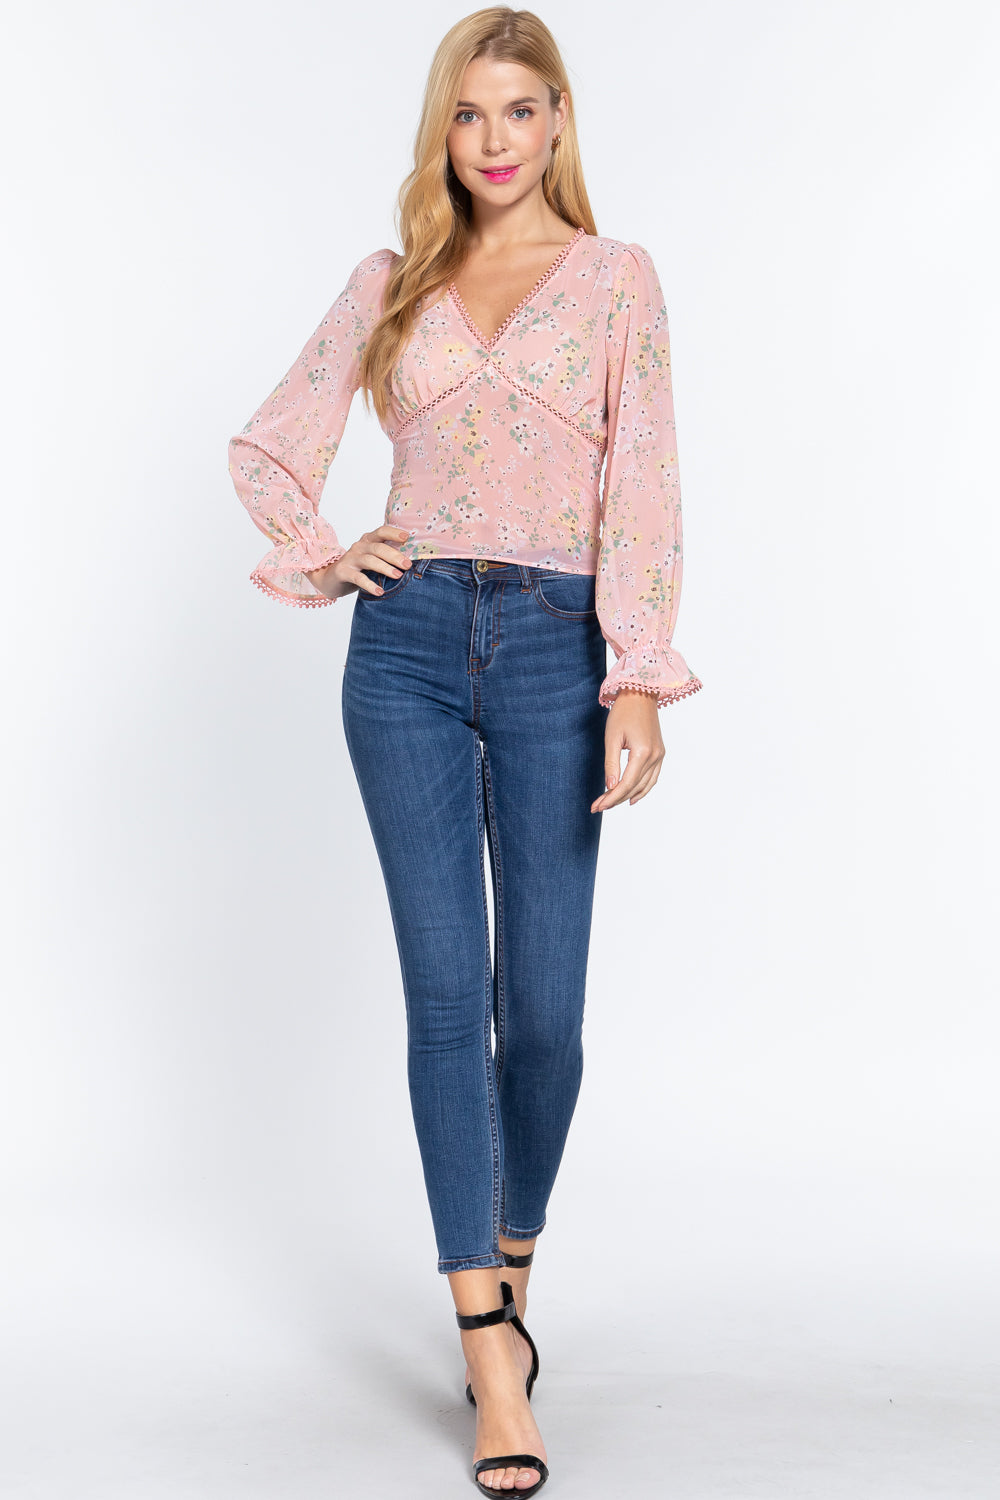 Ruffle Long Sleeve Floral Print Chiffon Top in Floral/Pink